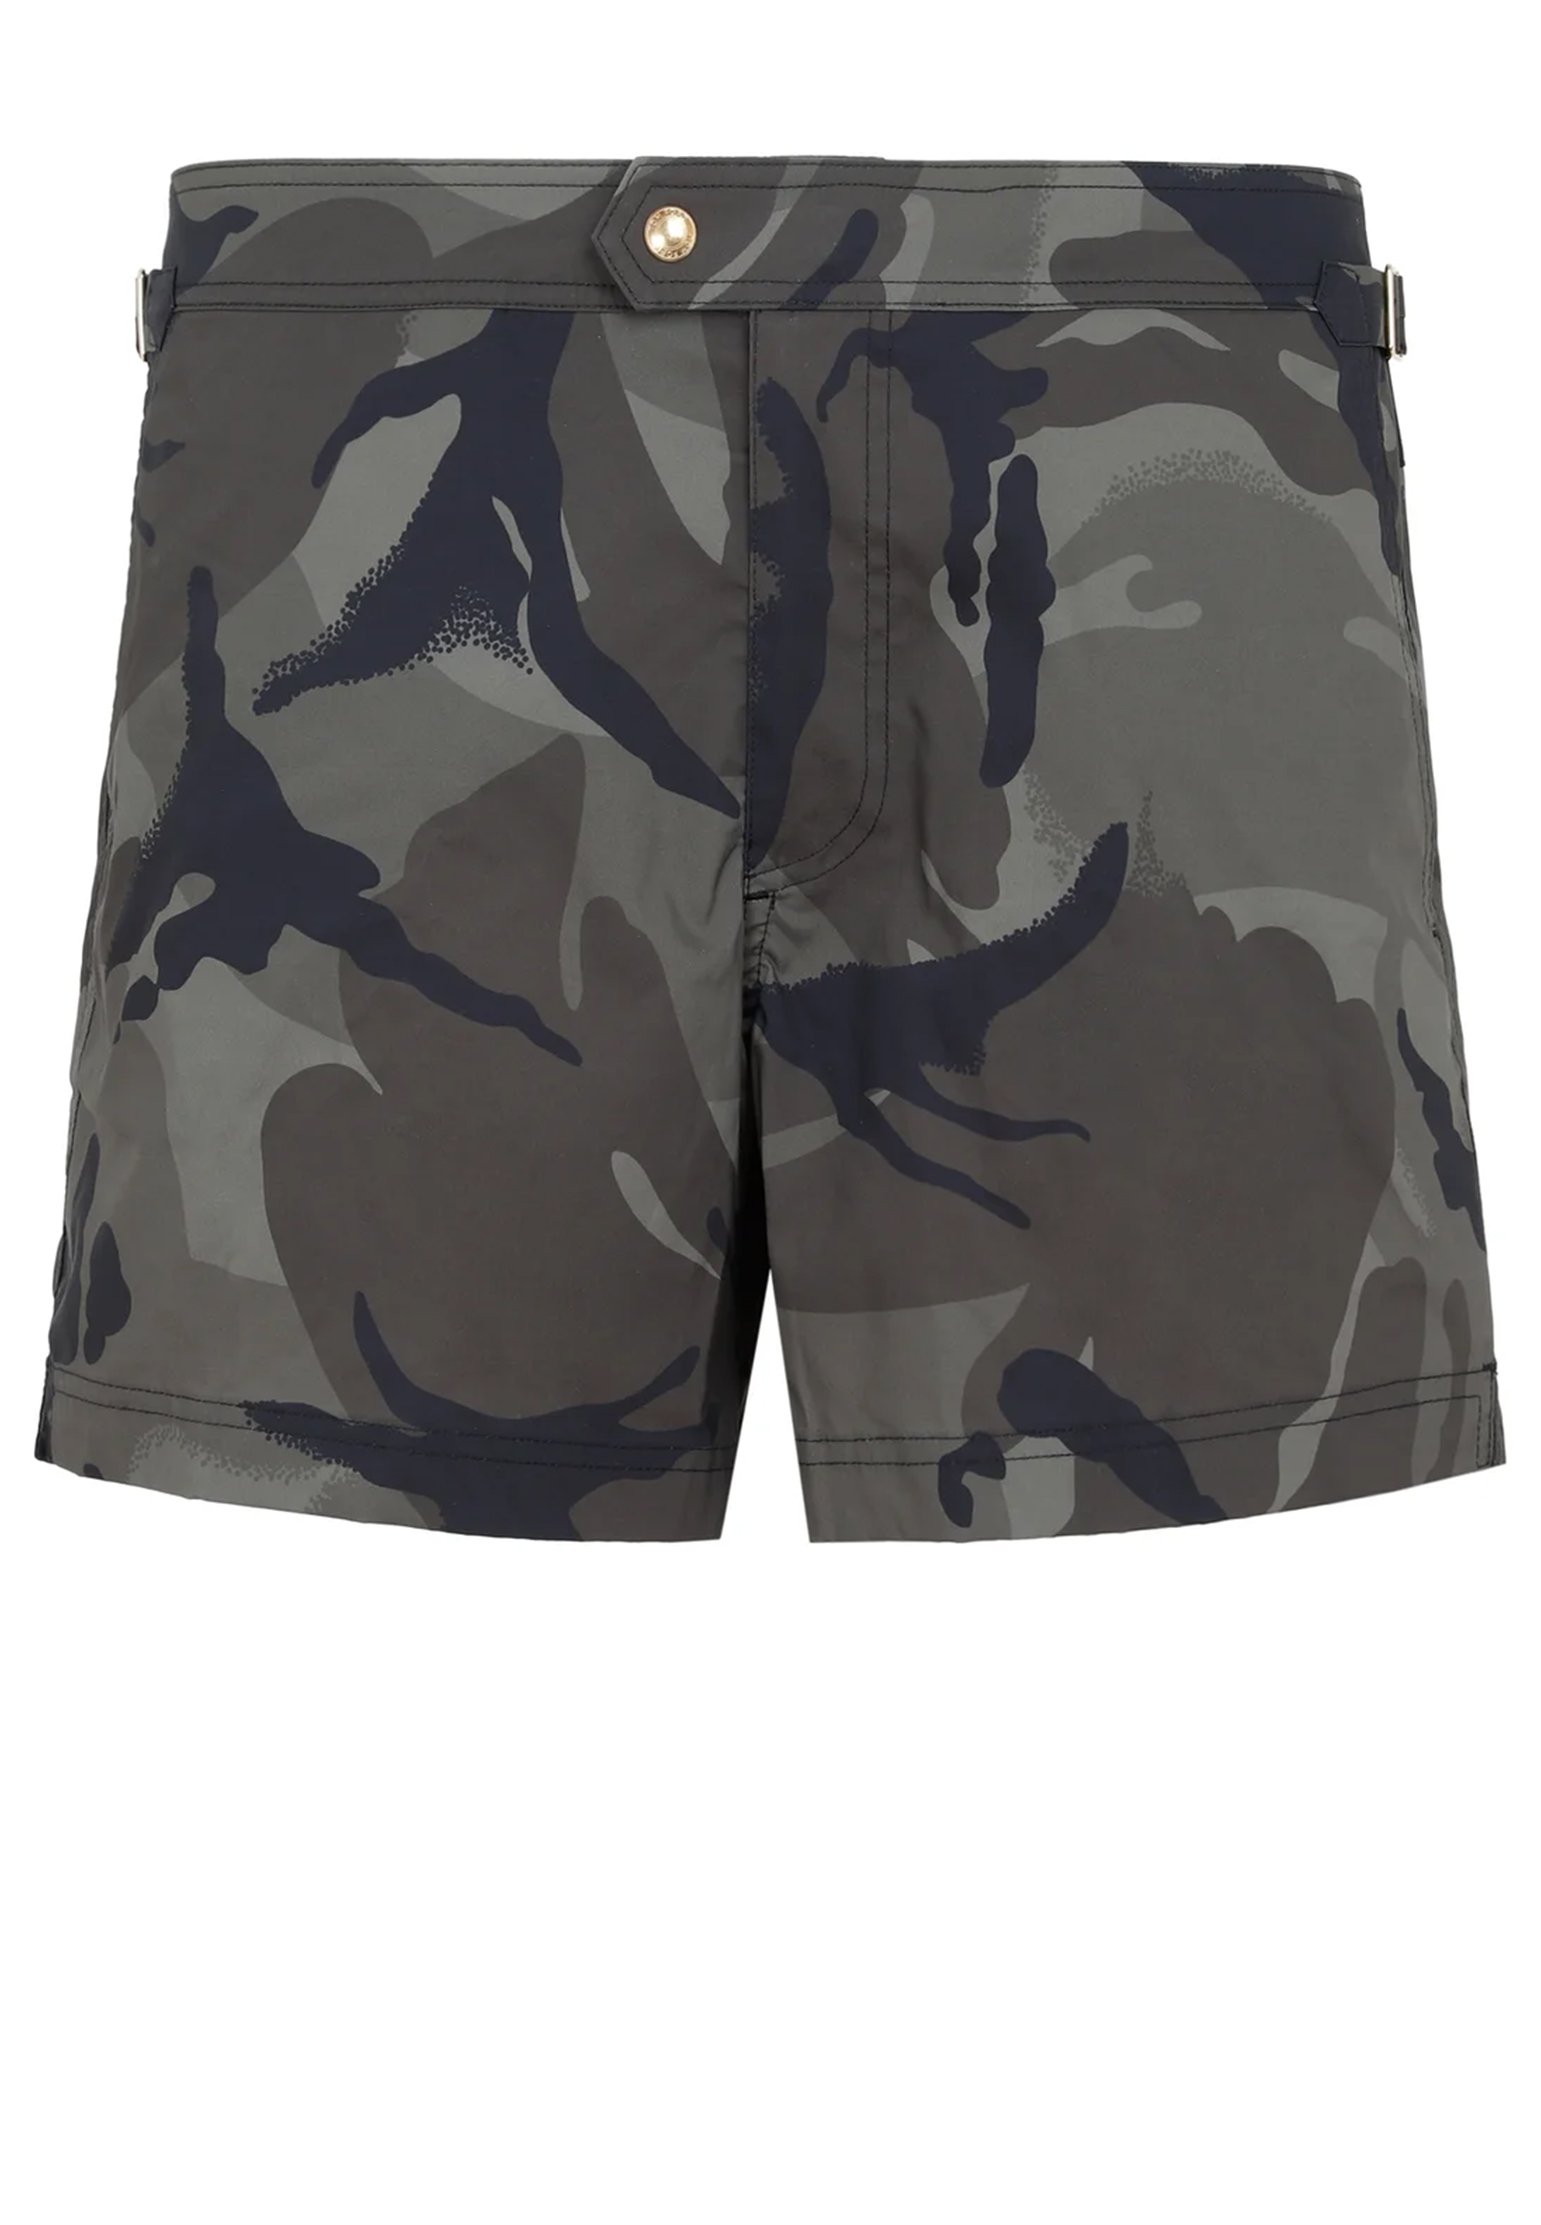 Beachwear TOM FORD Color: military (Code: 184) in online store Allure